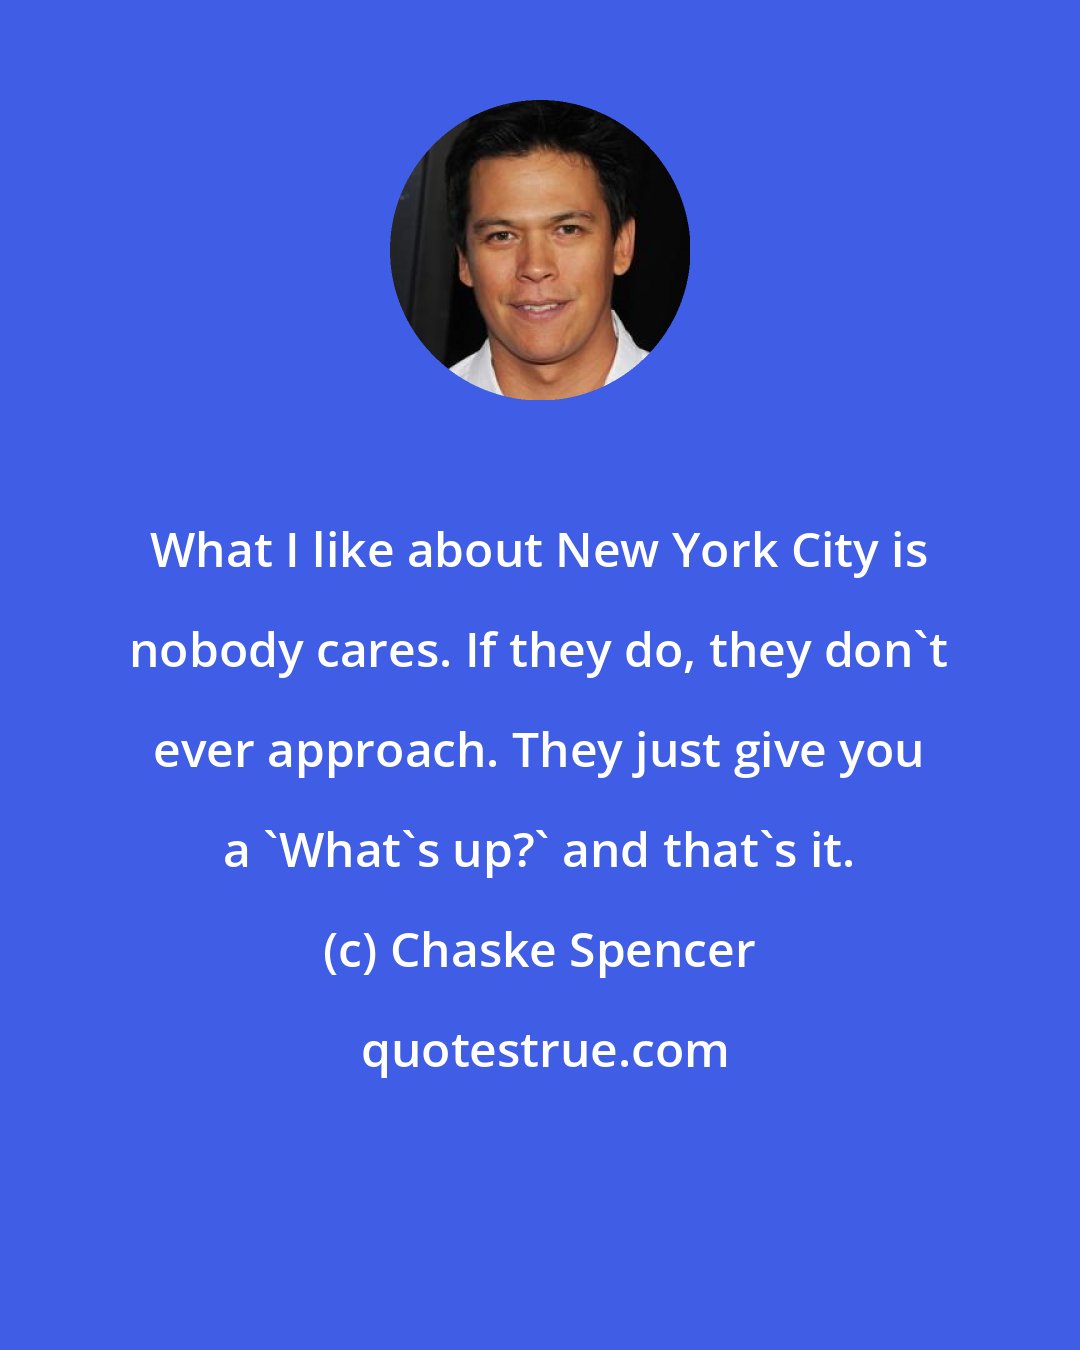 Chaske Spencer: What I like about New York City is nobody cares. If they do, they don't ever approach. They just give you a 'What's up?' and that's it.